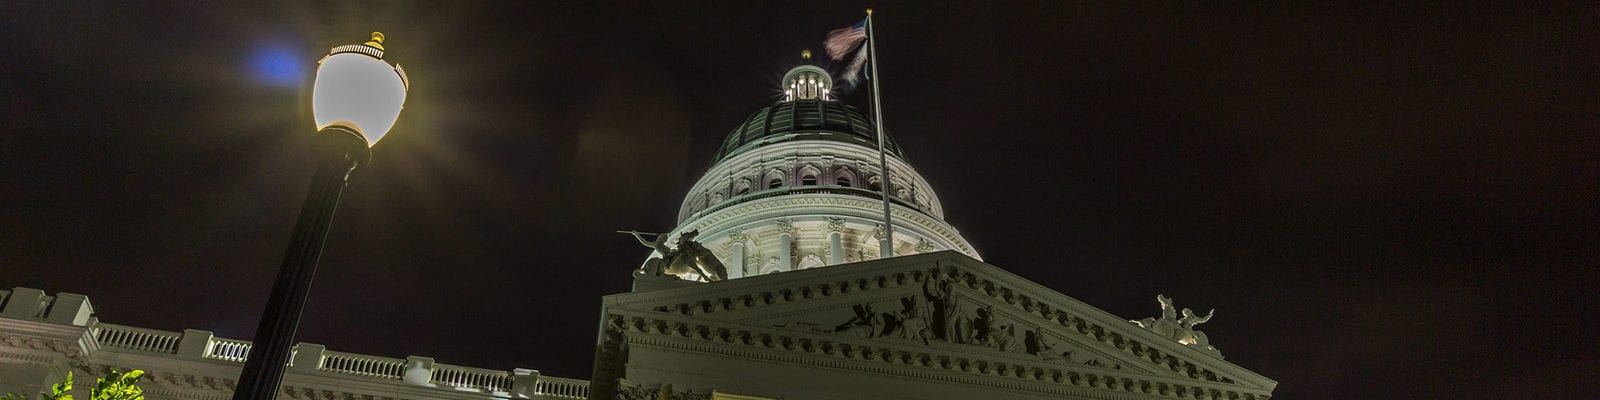 The California State Capitol Building in Sacramento, California photographed at nighttime.